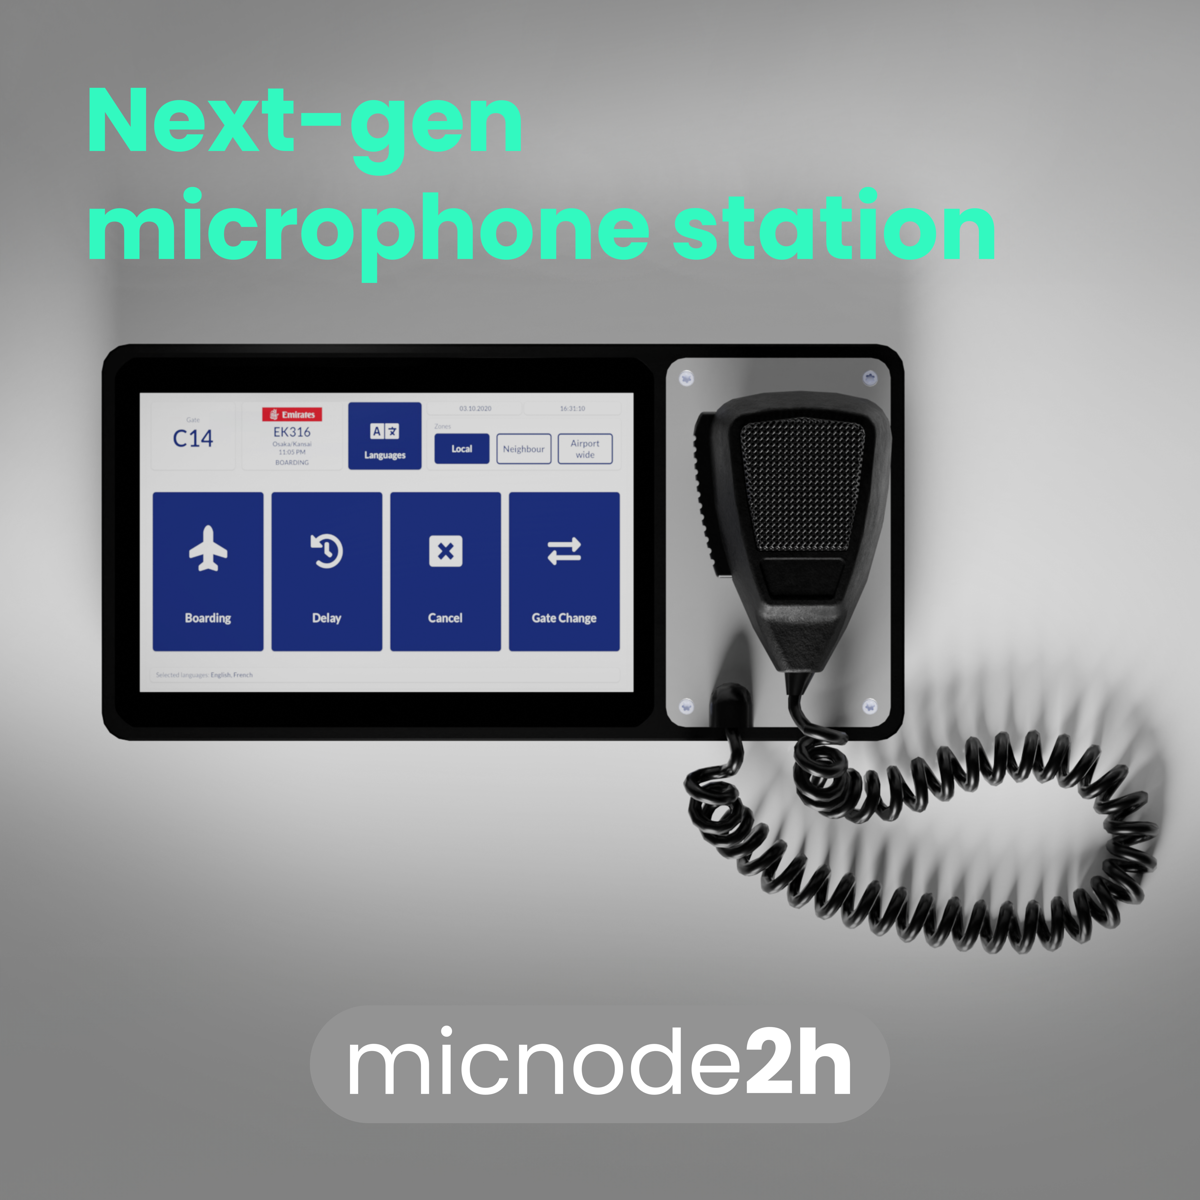  The micnode2h microphone station with a handheld microphone is presented as a next-generation microphone station. 